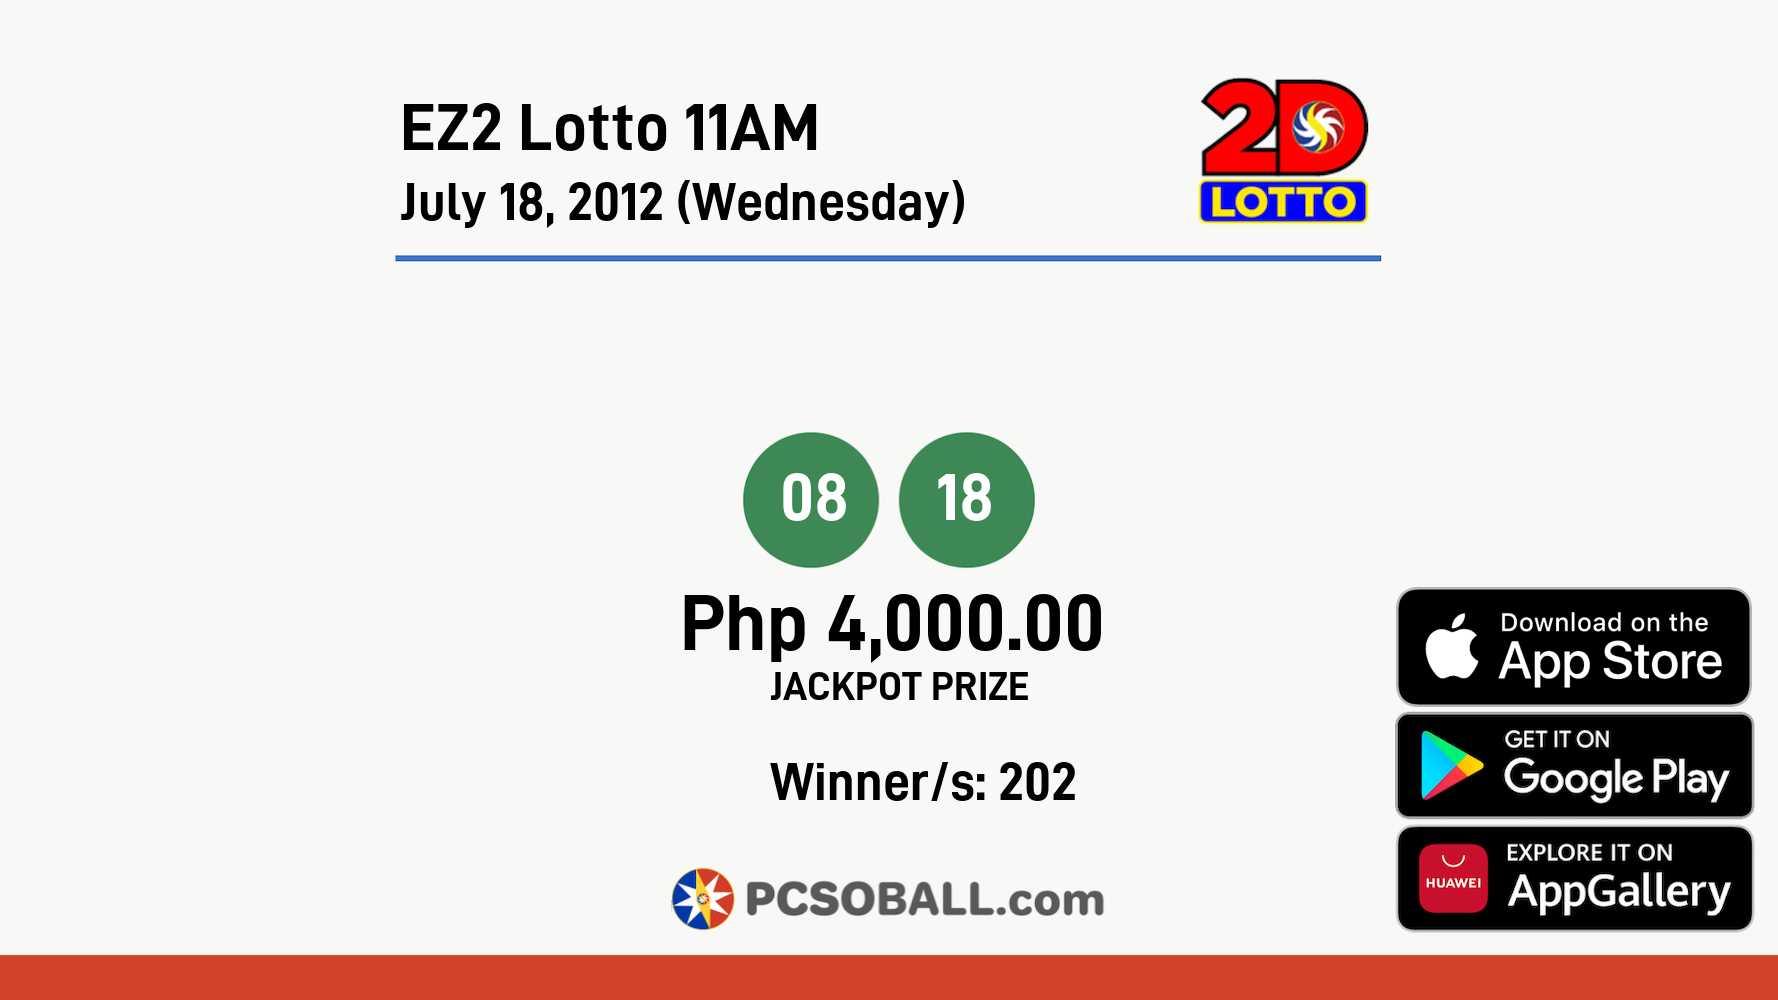 EZ2 Lotto 11AM July 18, 2012 (Wednesday) Result